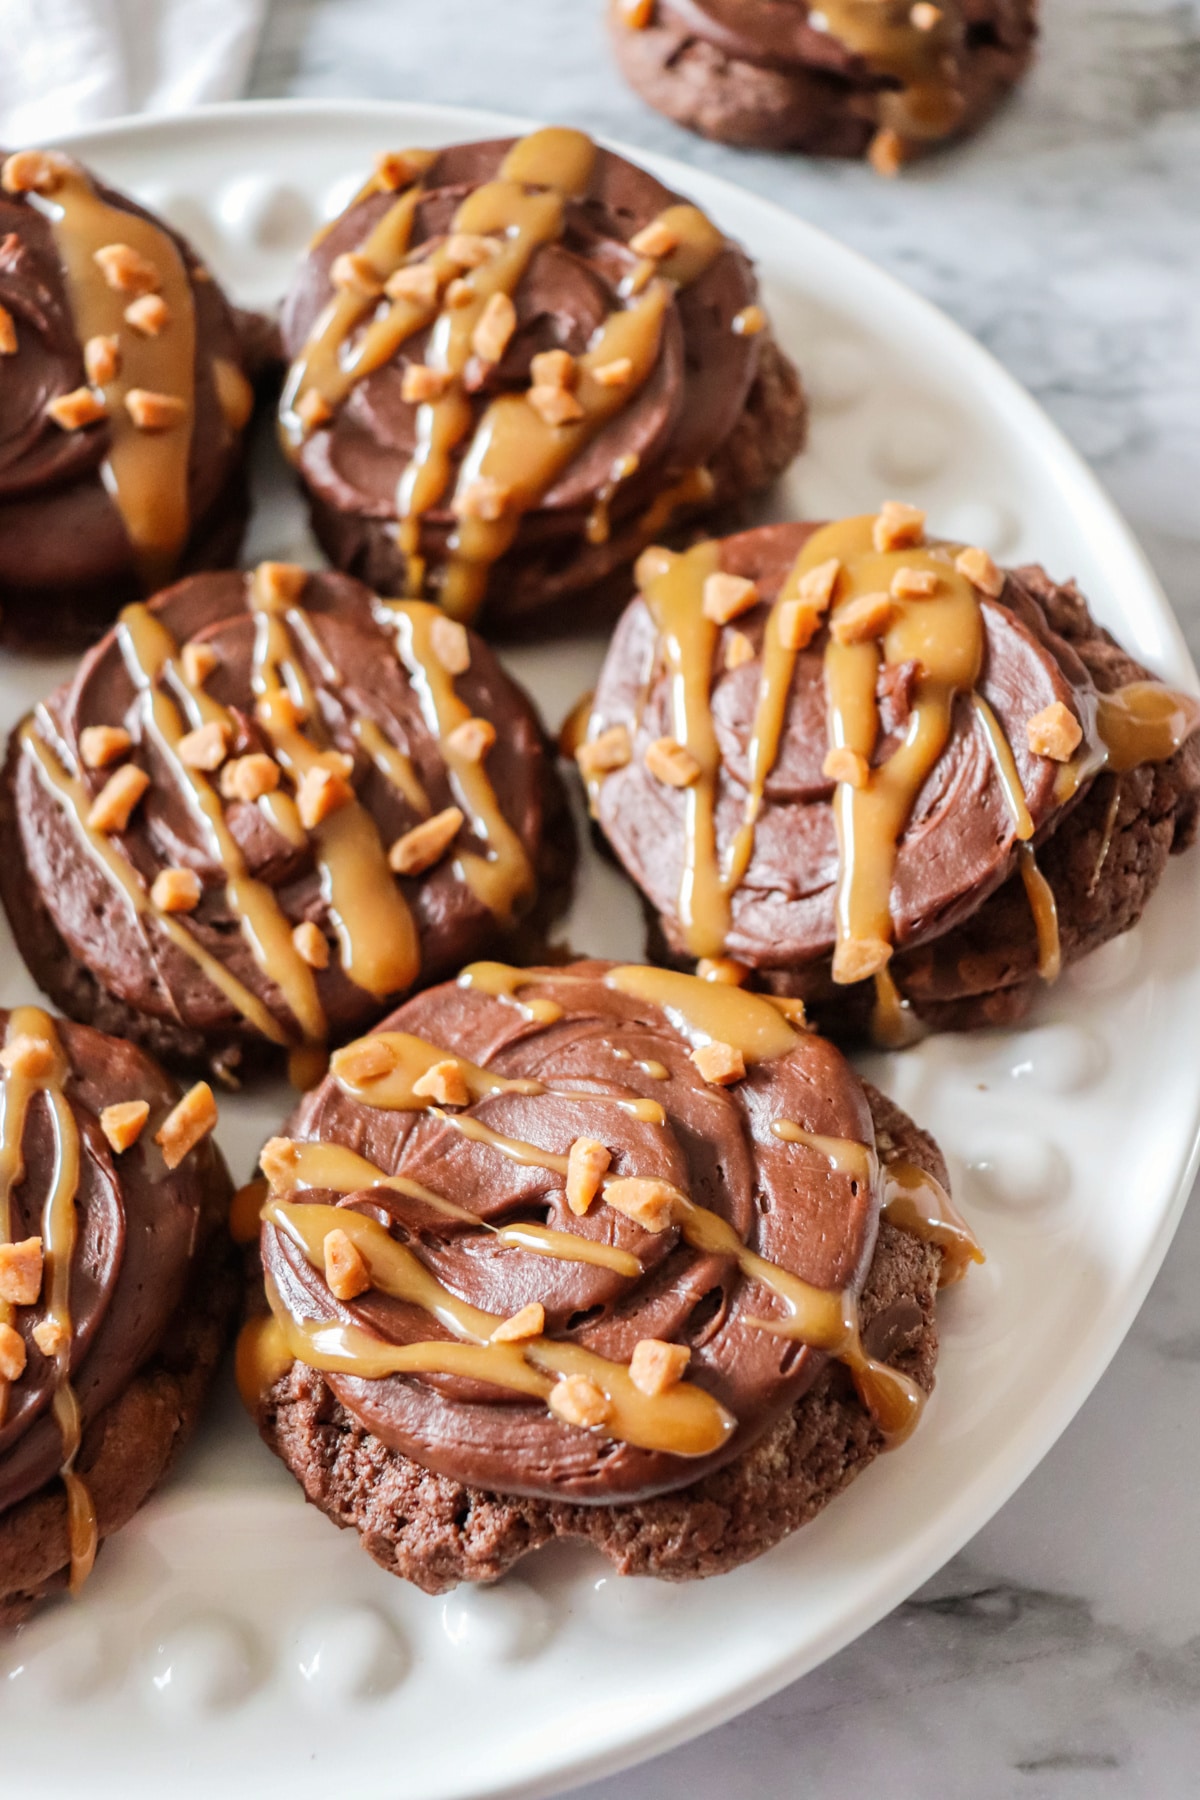 Chocolate Caramel Cookies on a plate